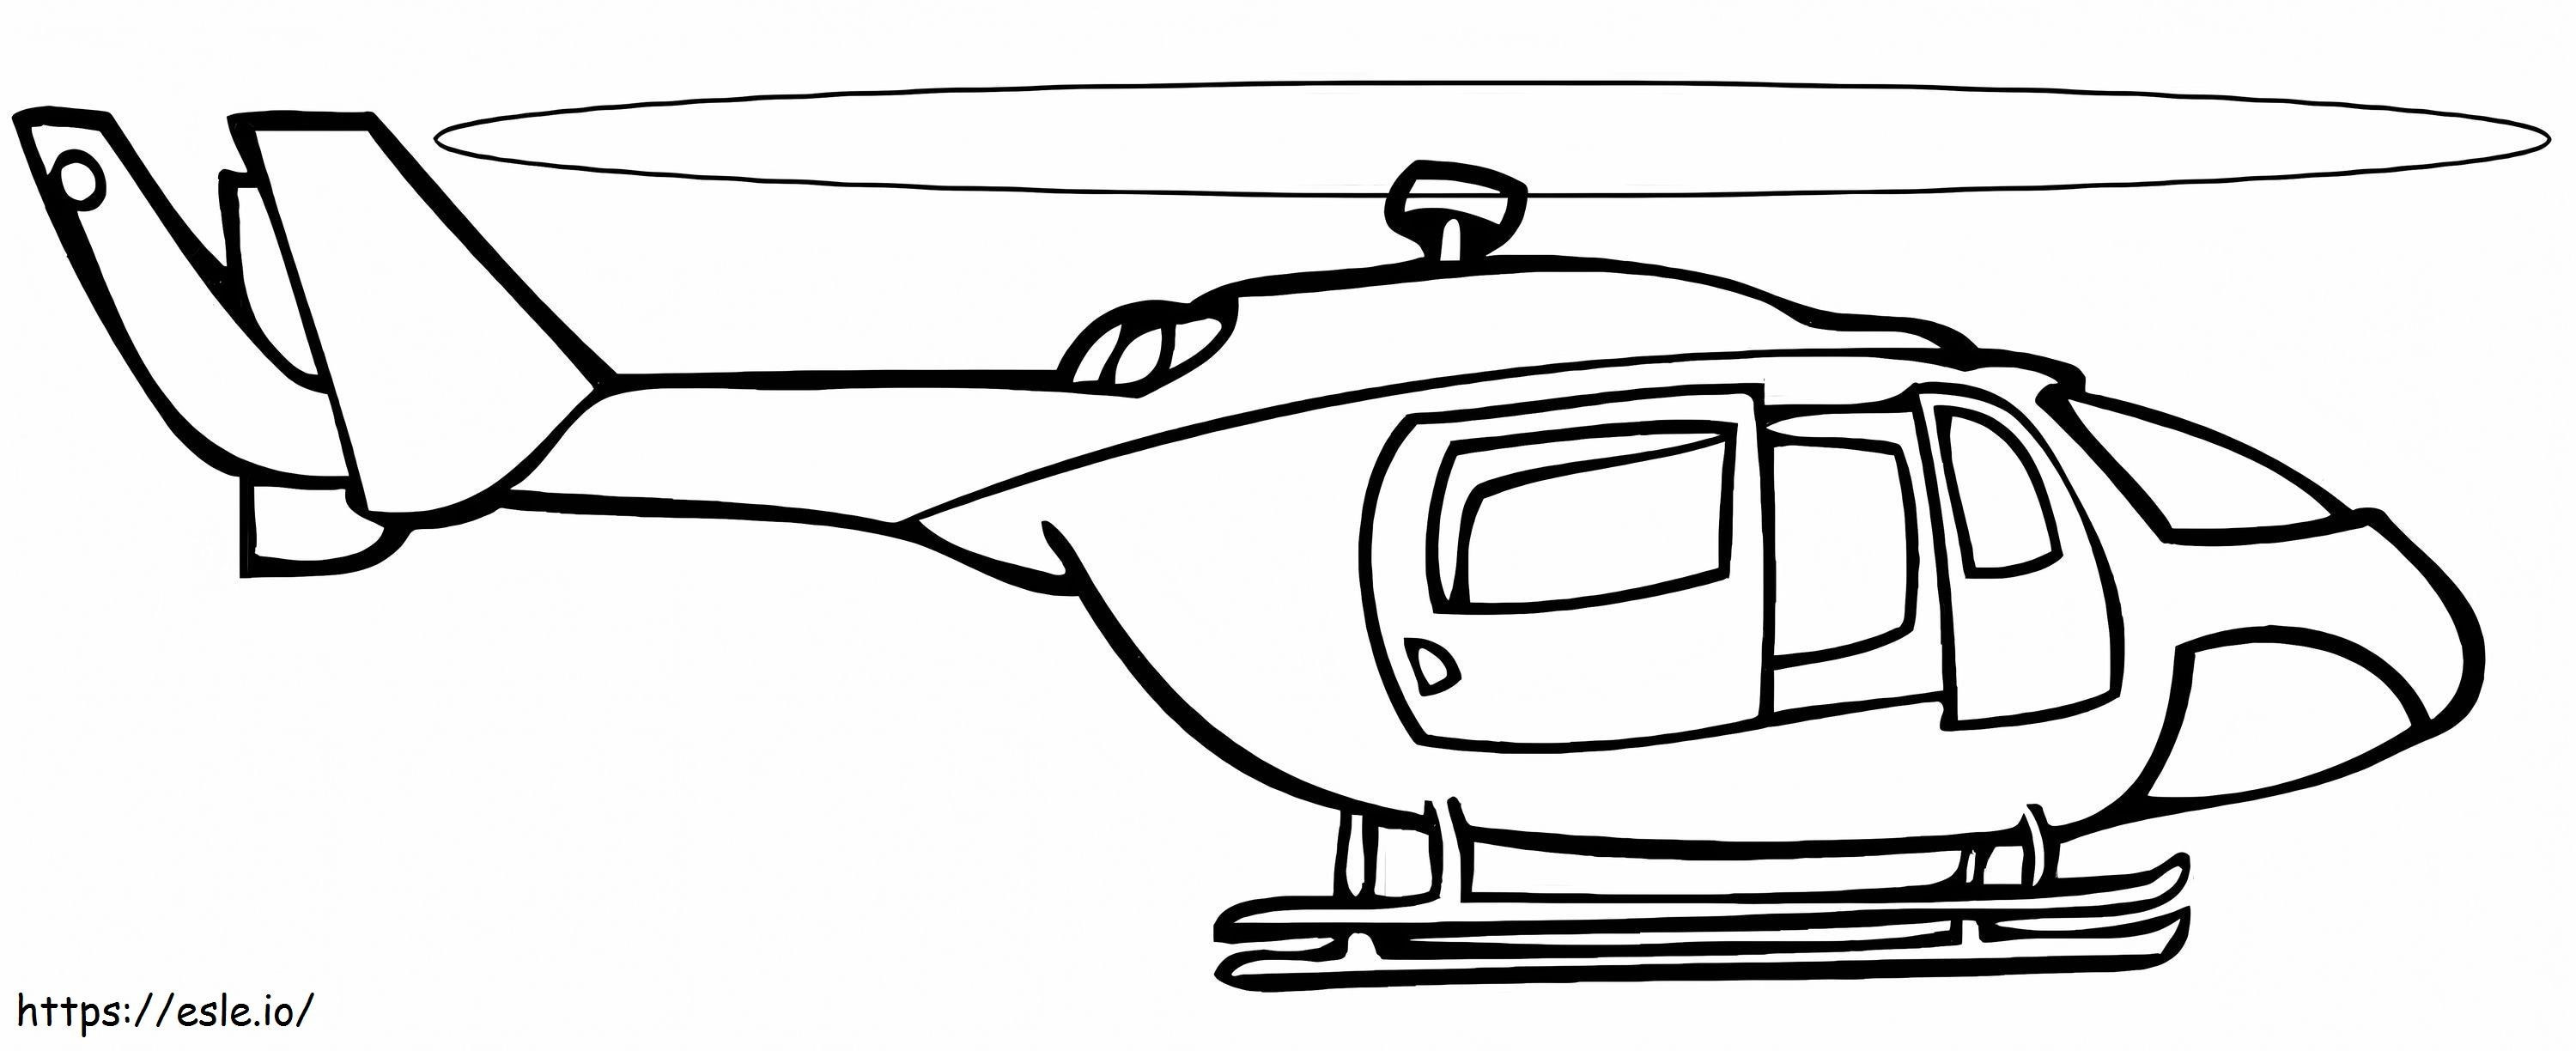 Helicopter 4 coloring page